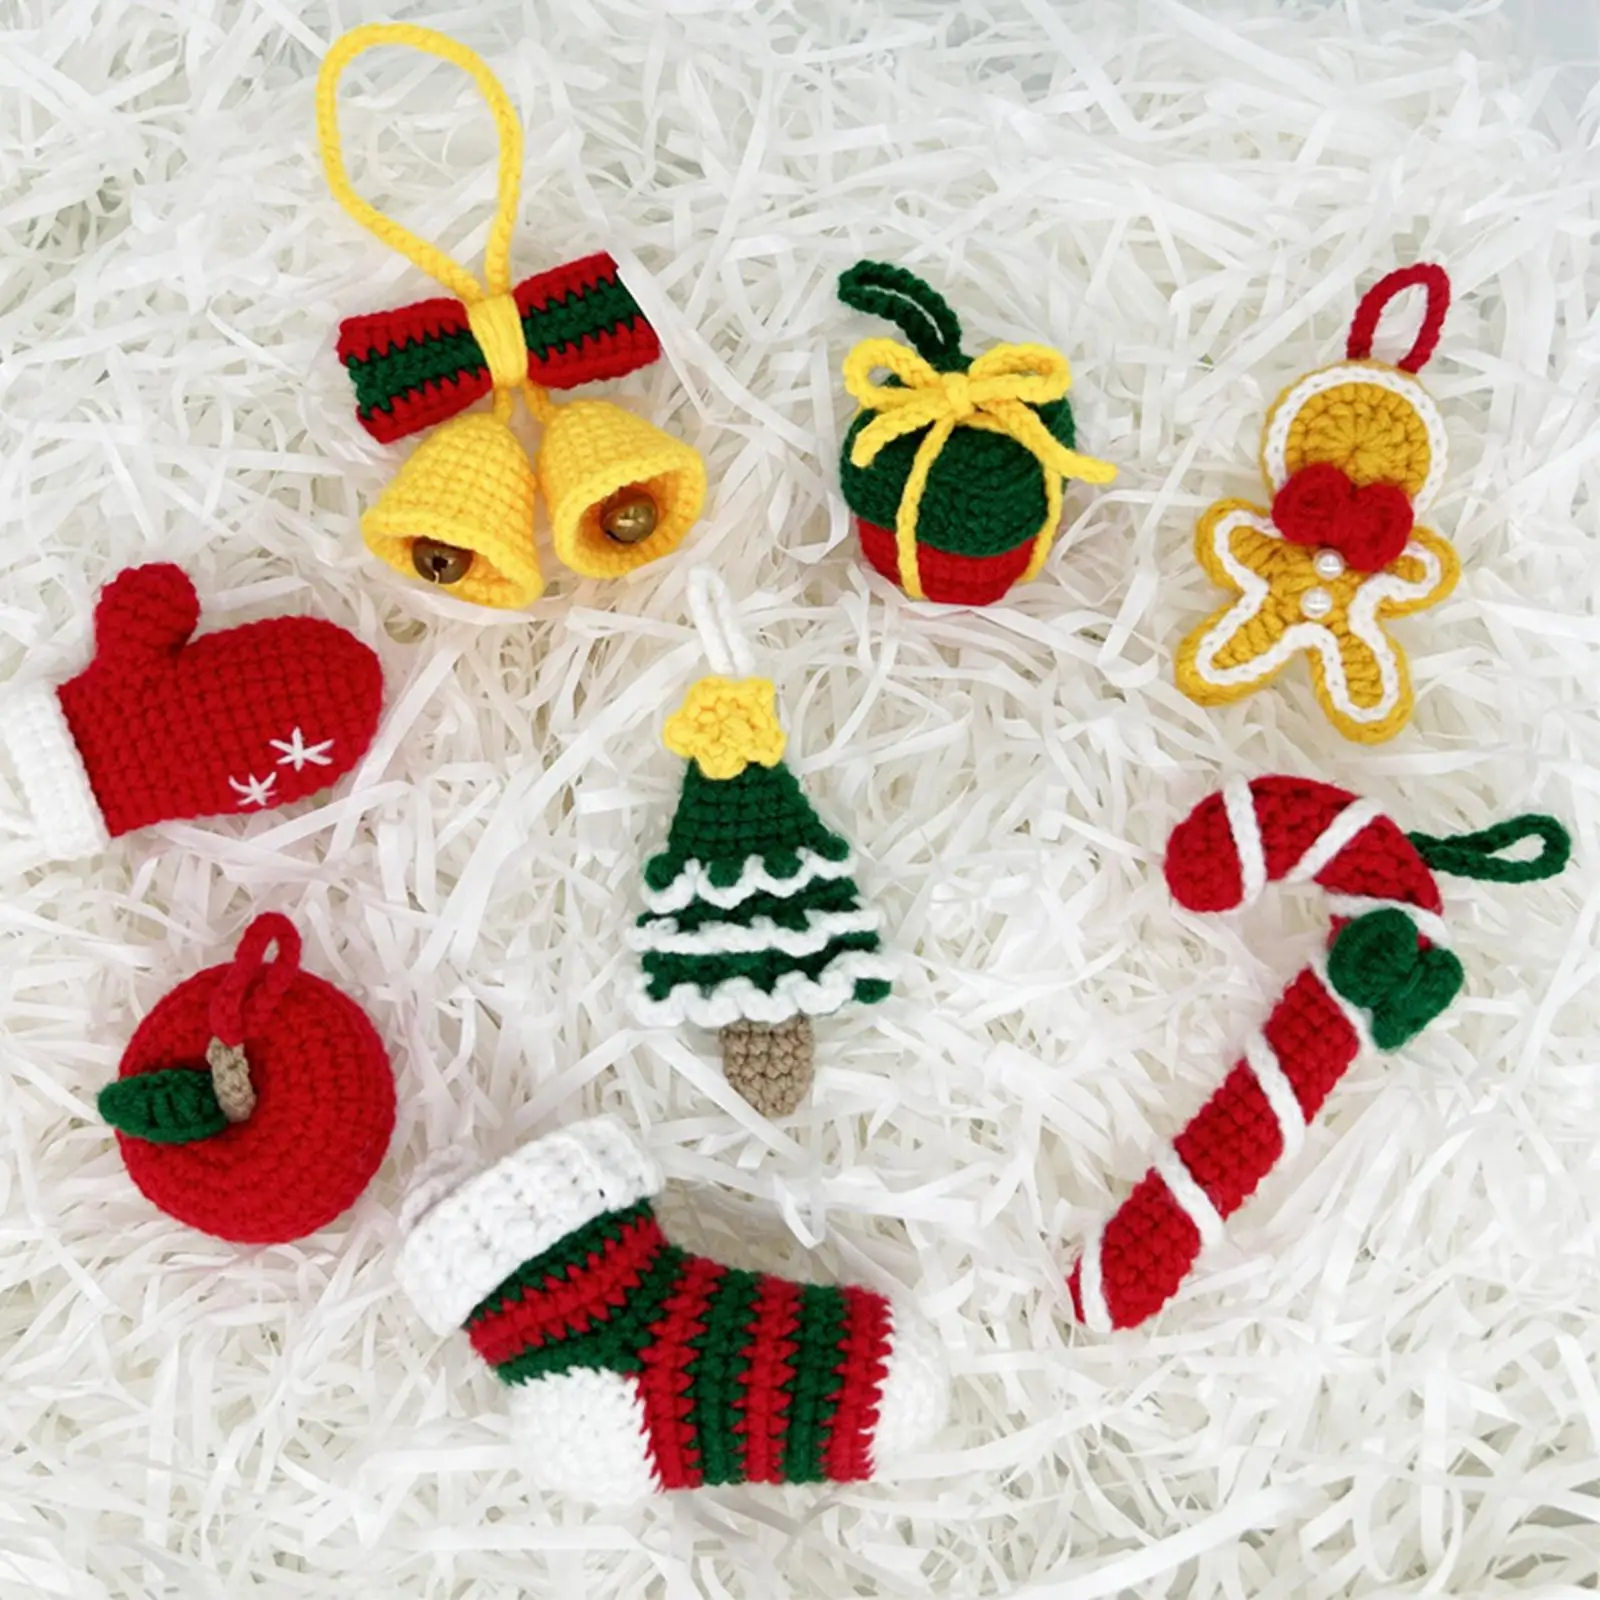 8 Pieces Christmas Crochet Kit Crochet Craft Set Accessories Home Decor for Beginner Adult Kids for Thanksgiving Party Favors